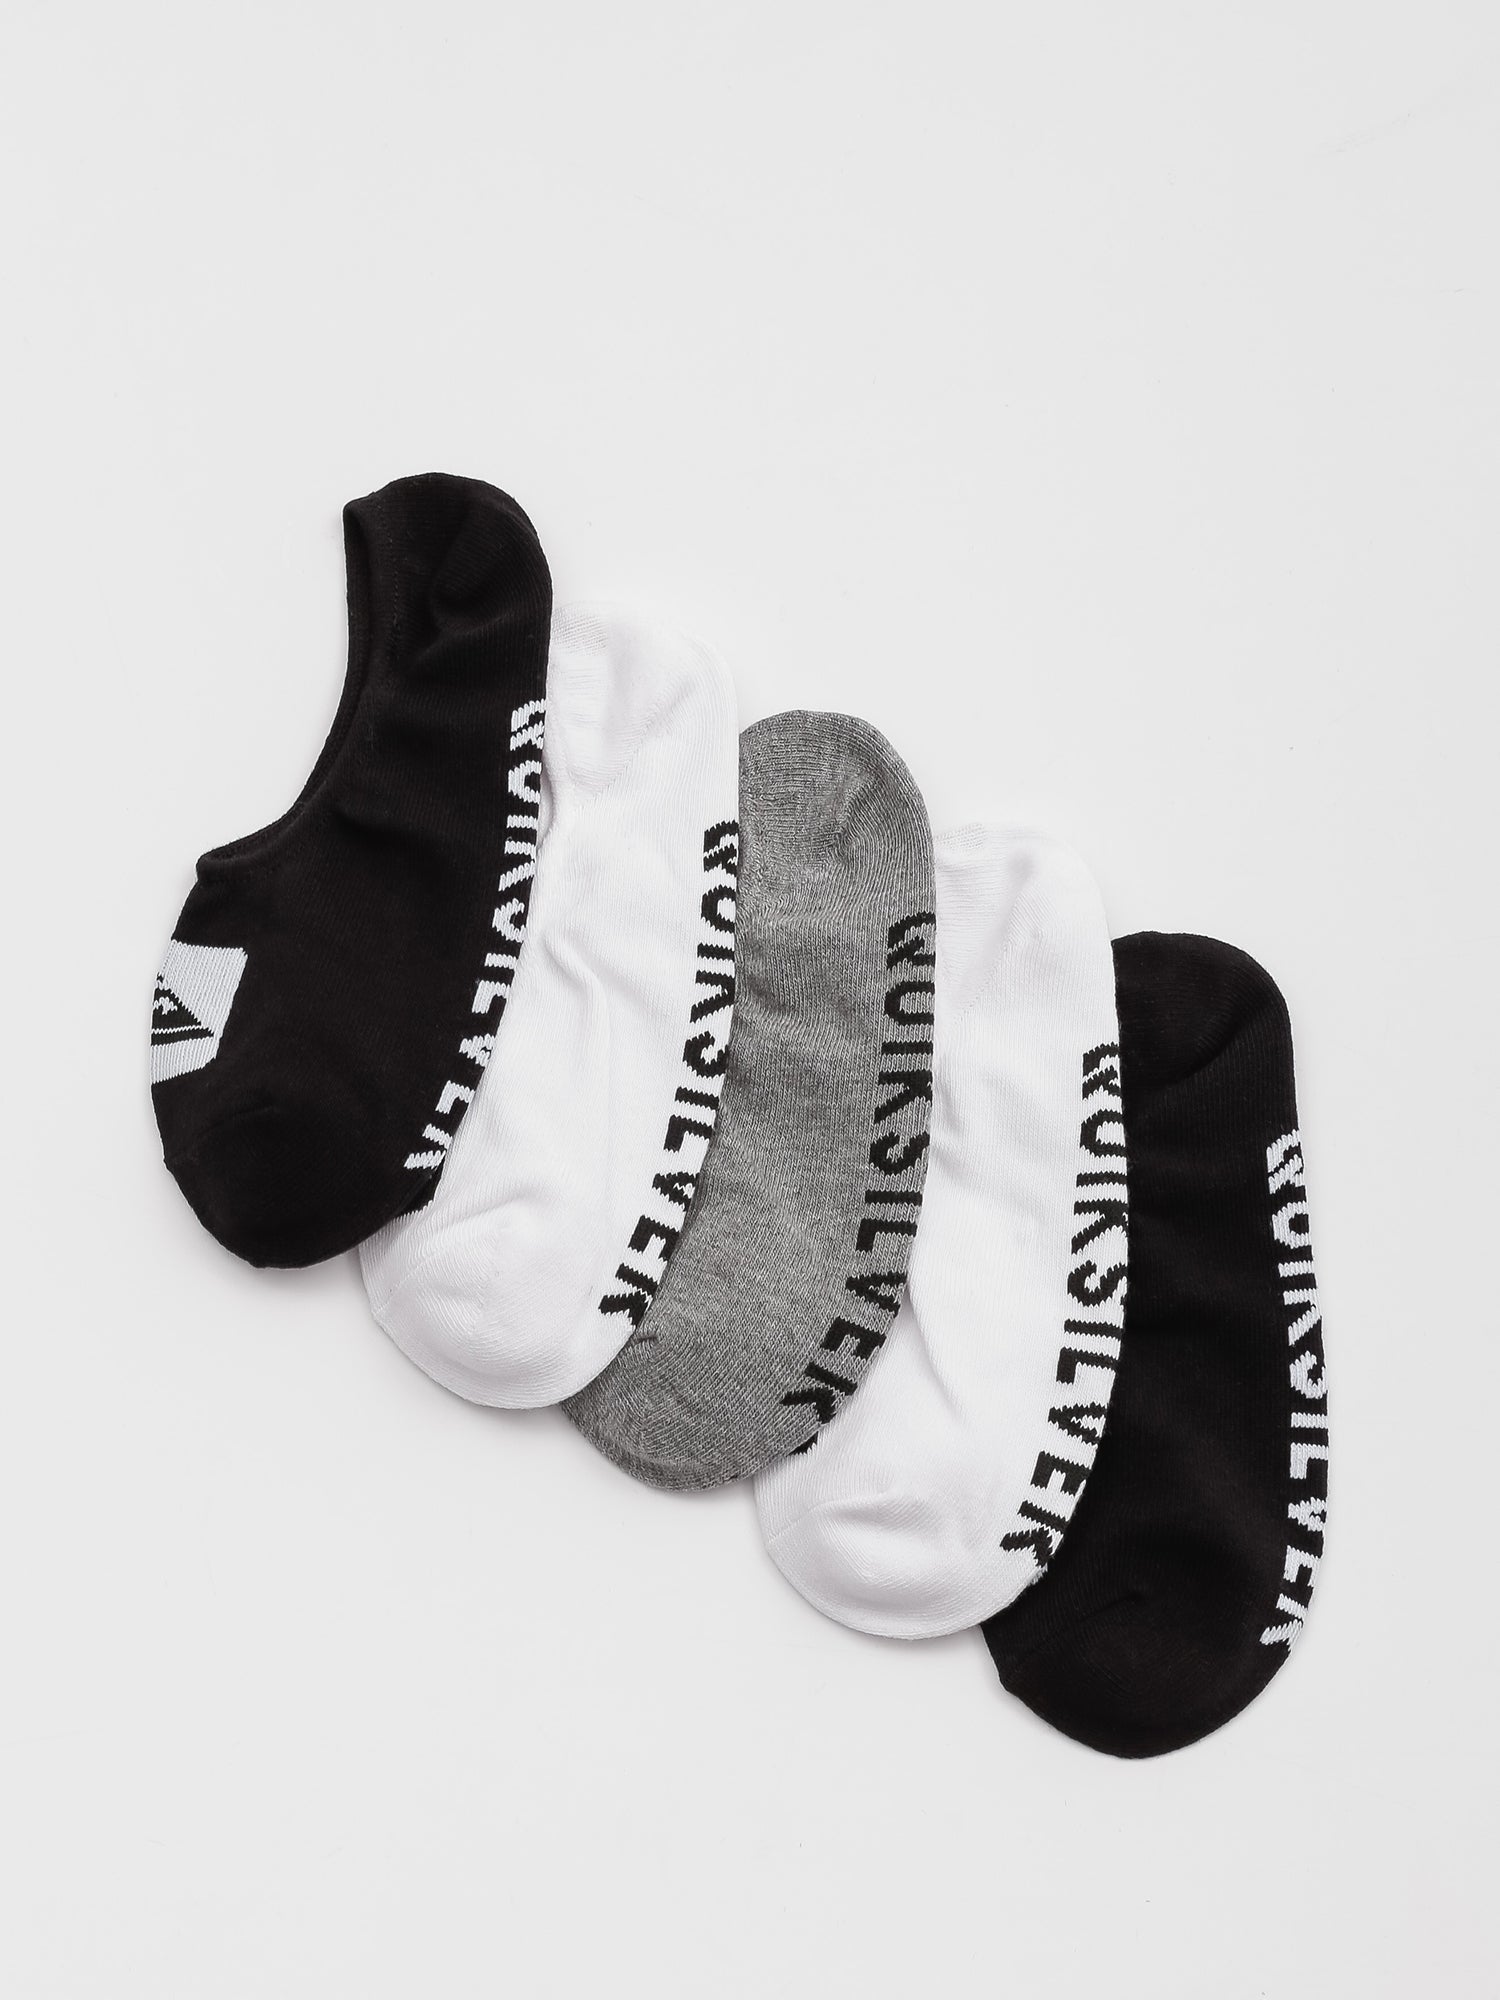 Quiksilver 5 Liner Pack Sox - Assorted